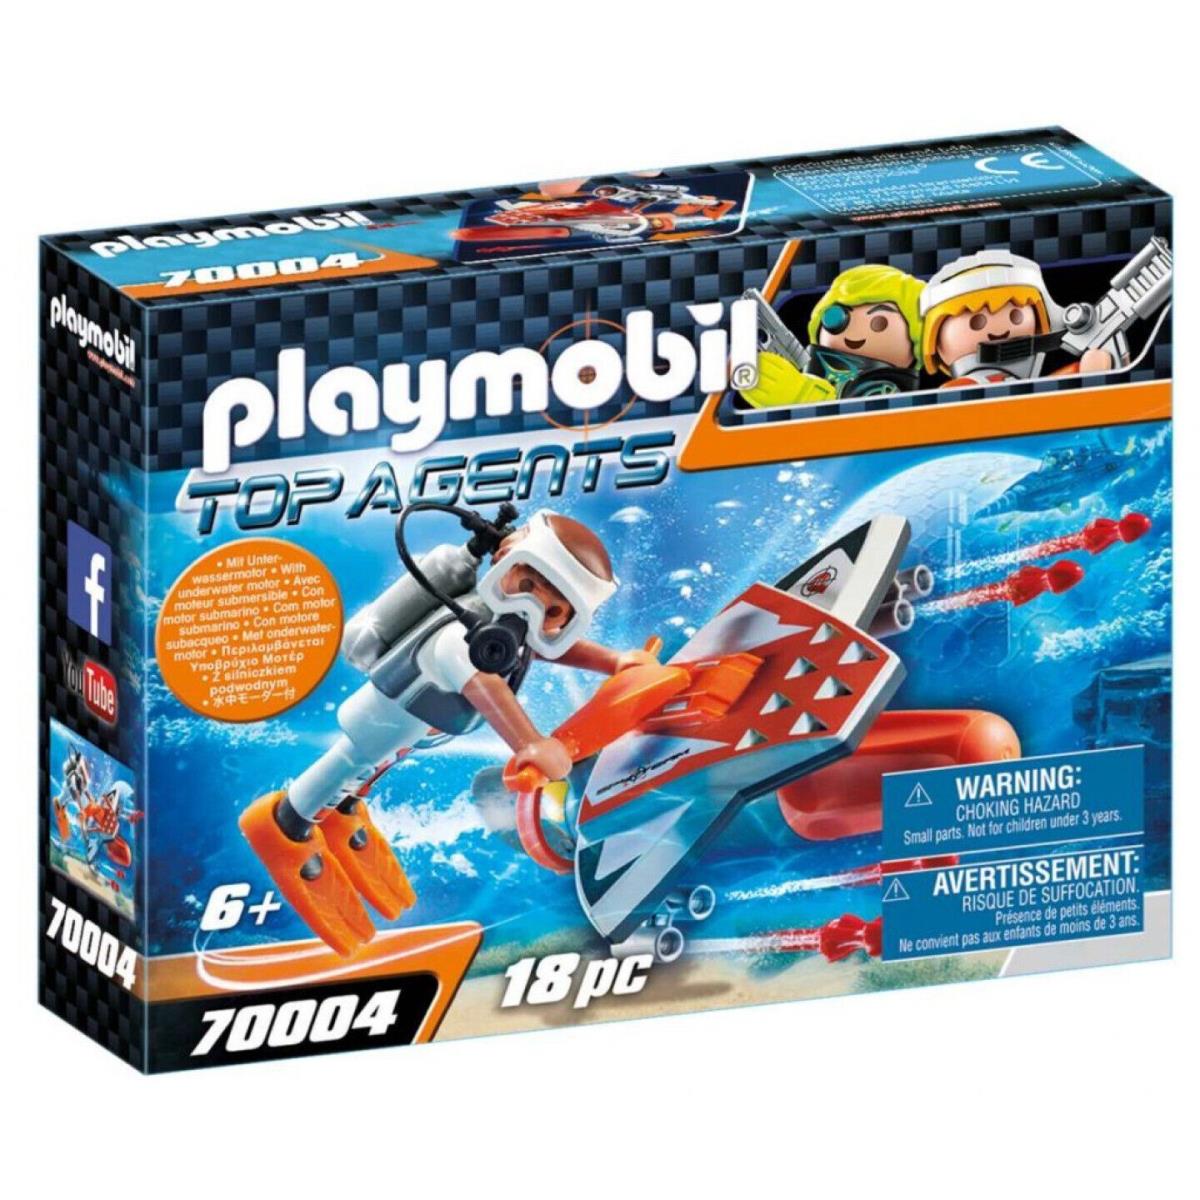 Playmobil 70004 Top Agents Spy Team Underwater Wing Multi-coloured Building Kit